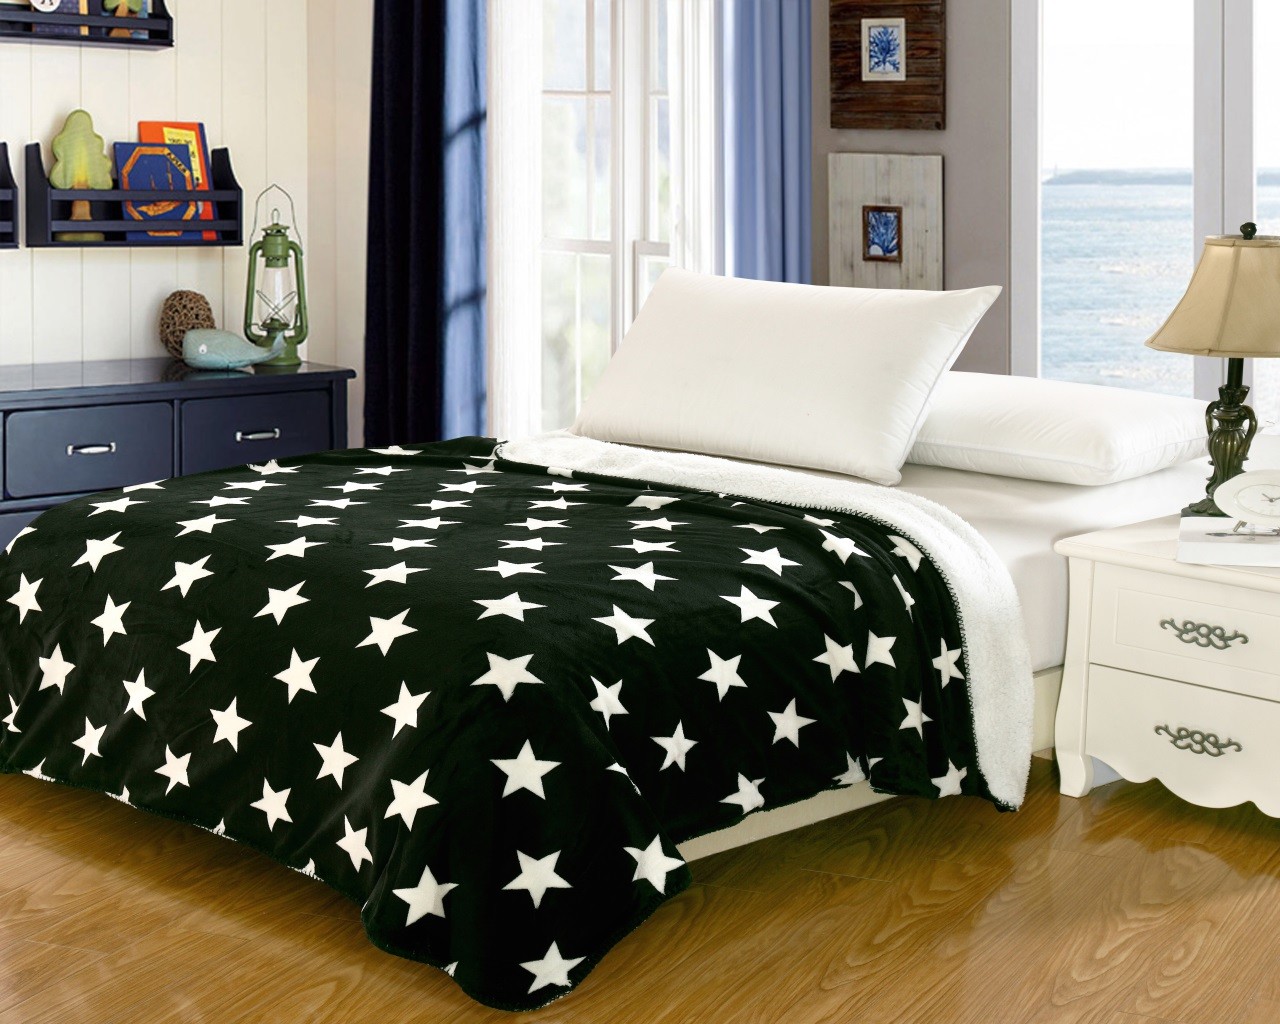 Best Household Bedding Fleece Flannel Blanket Color Printed With Custom Patterns wholesale